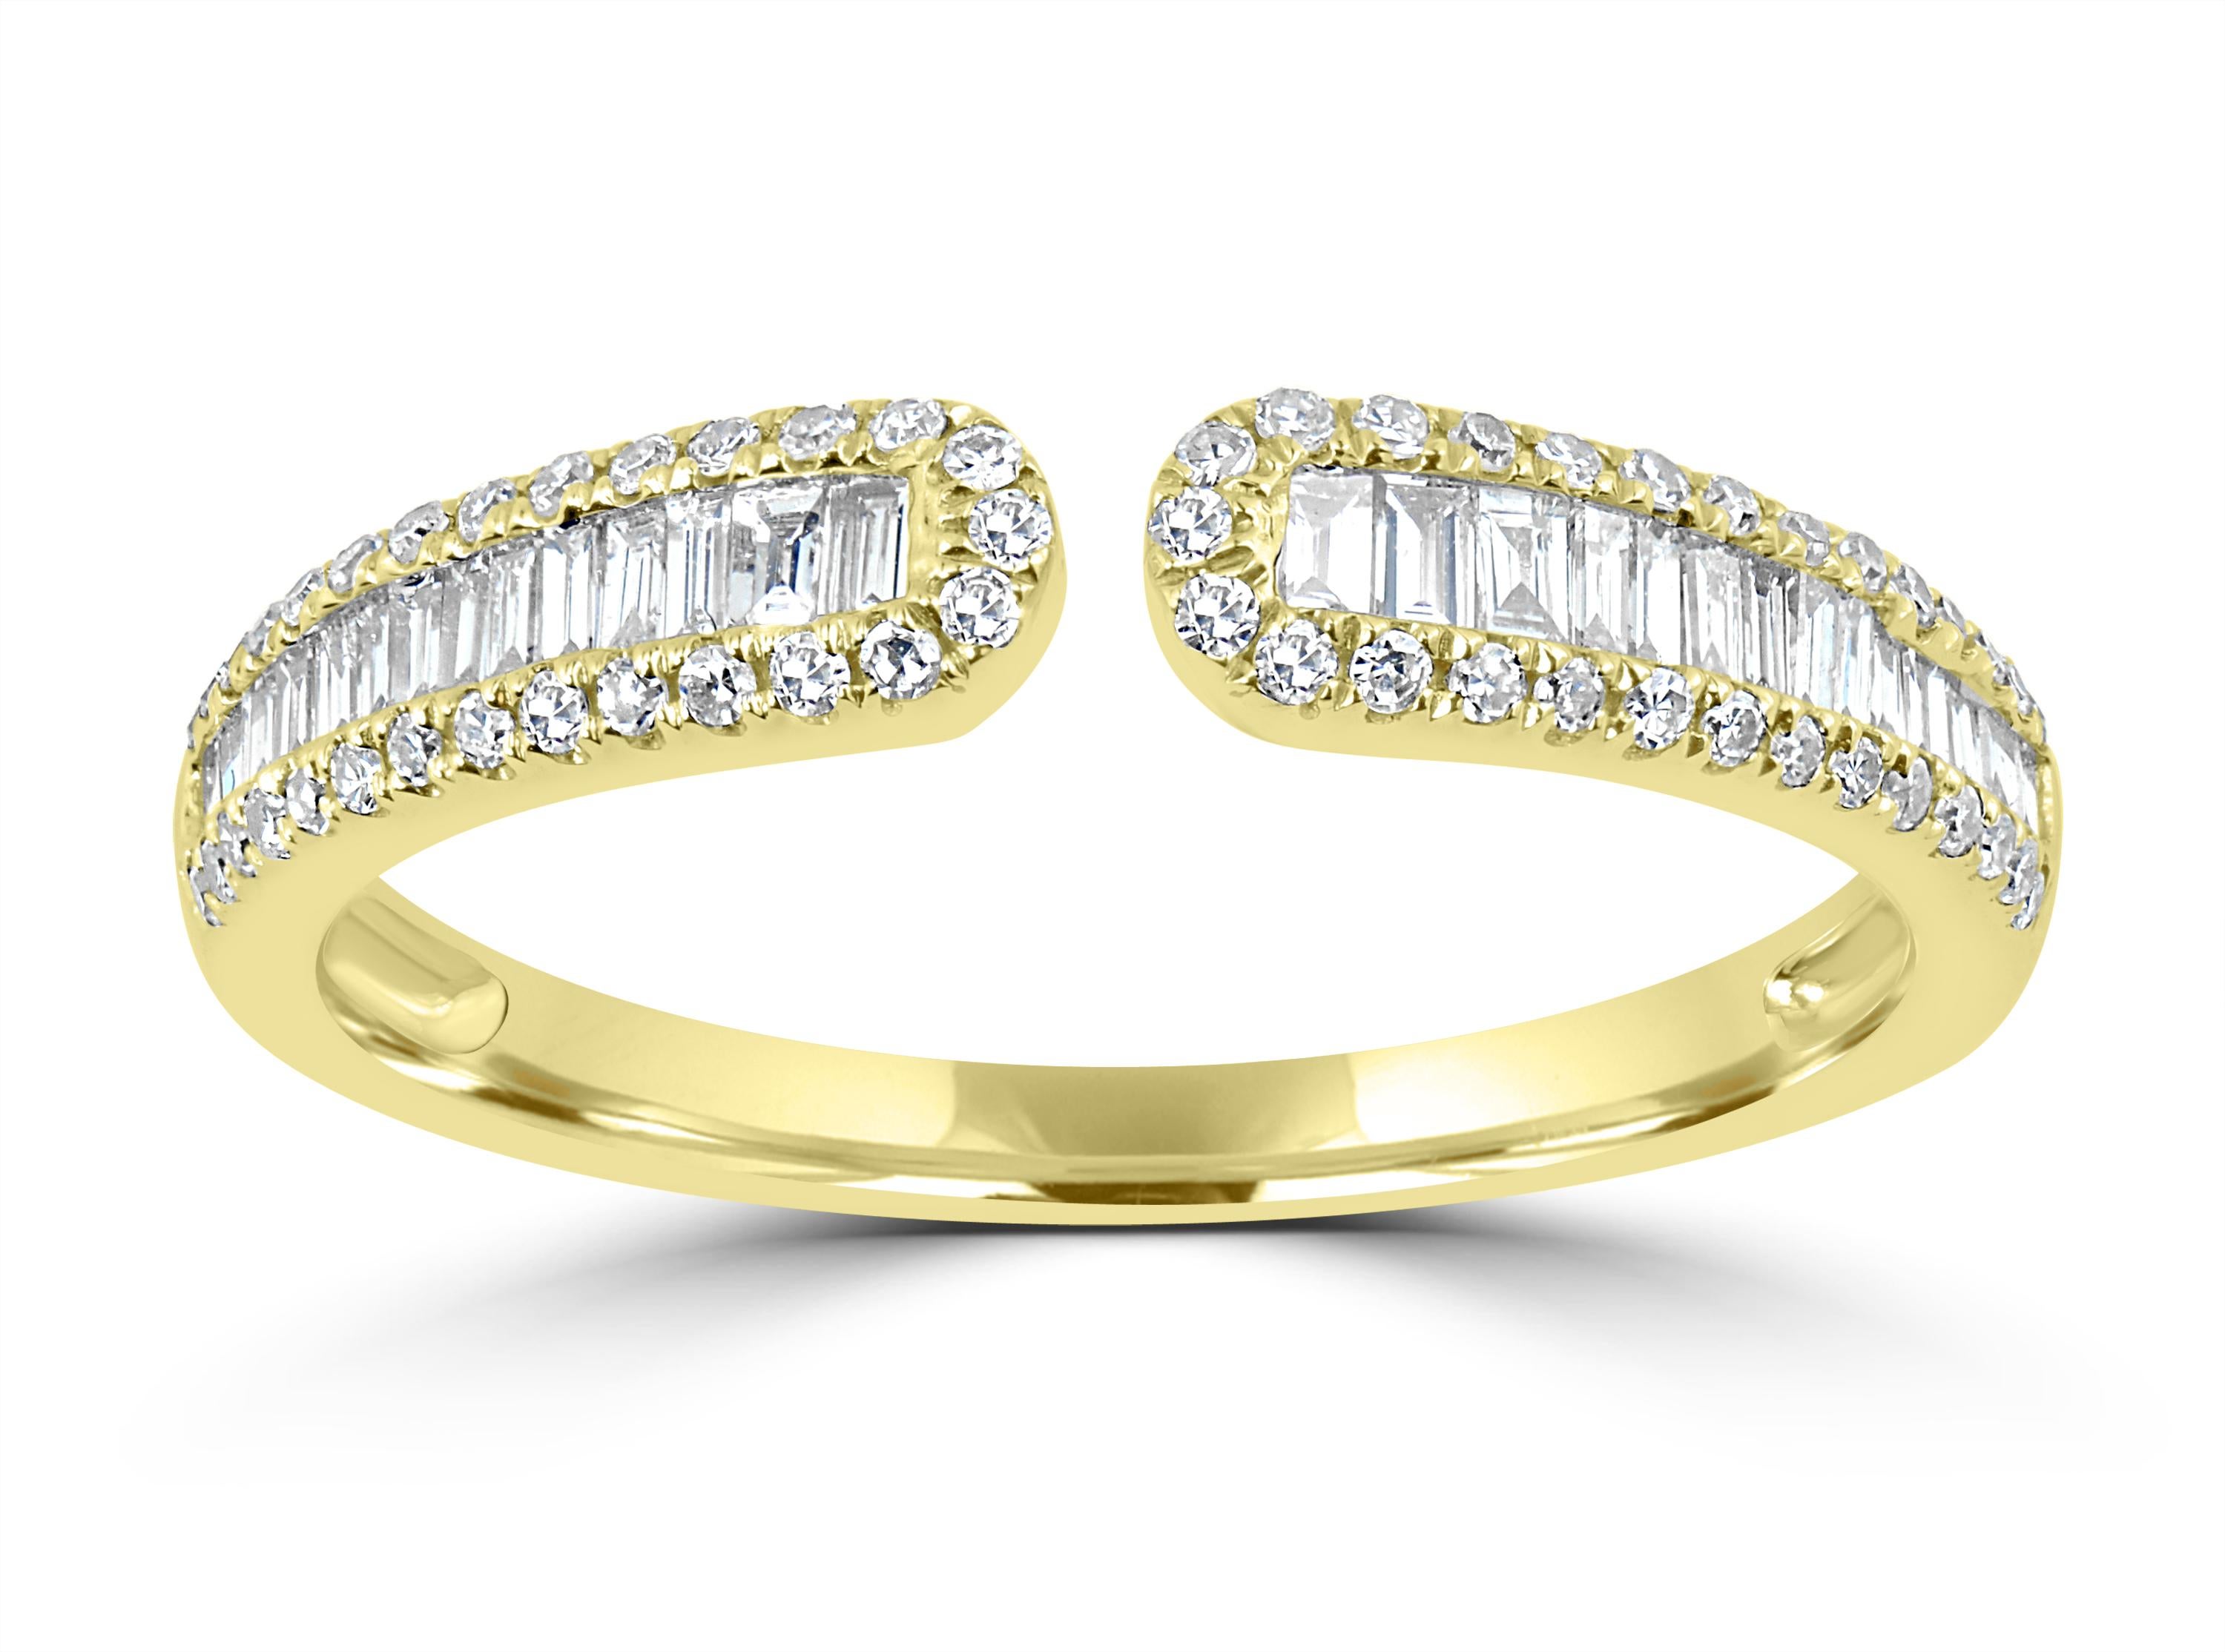 This Luxle gorgeous ring shimmer with baguettes framed in pave diamonds on either sides  in 14K yellow gold that give this piece an elegant vibe that you will adore.

Please follow the Luxury Jewels storefront to view the latest collections &